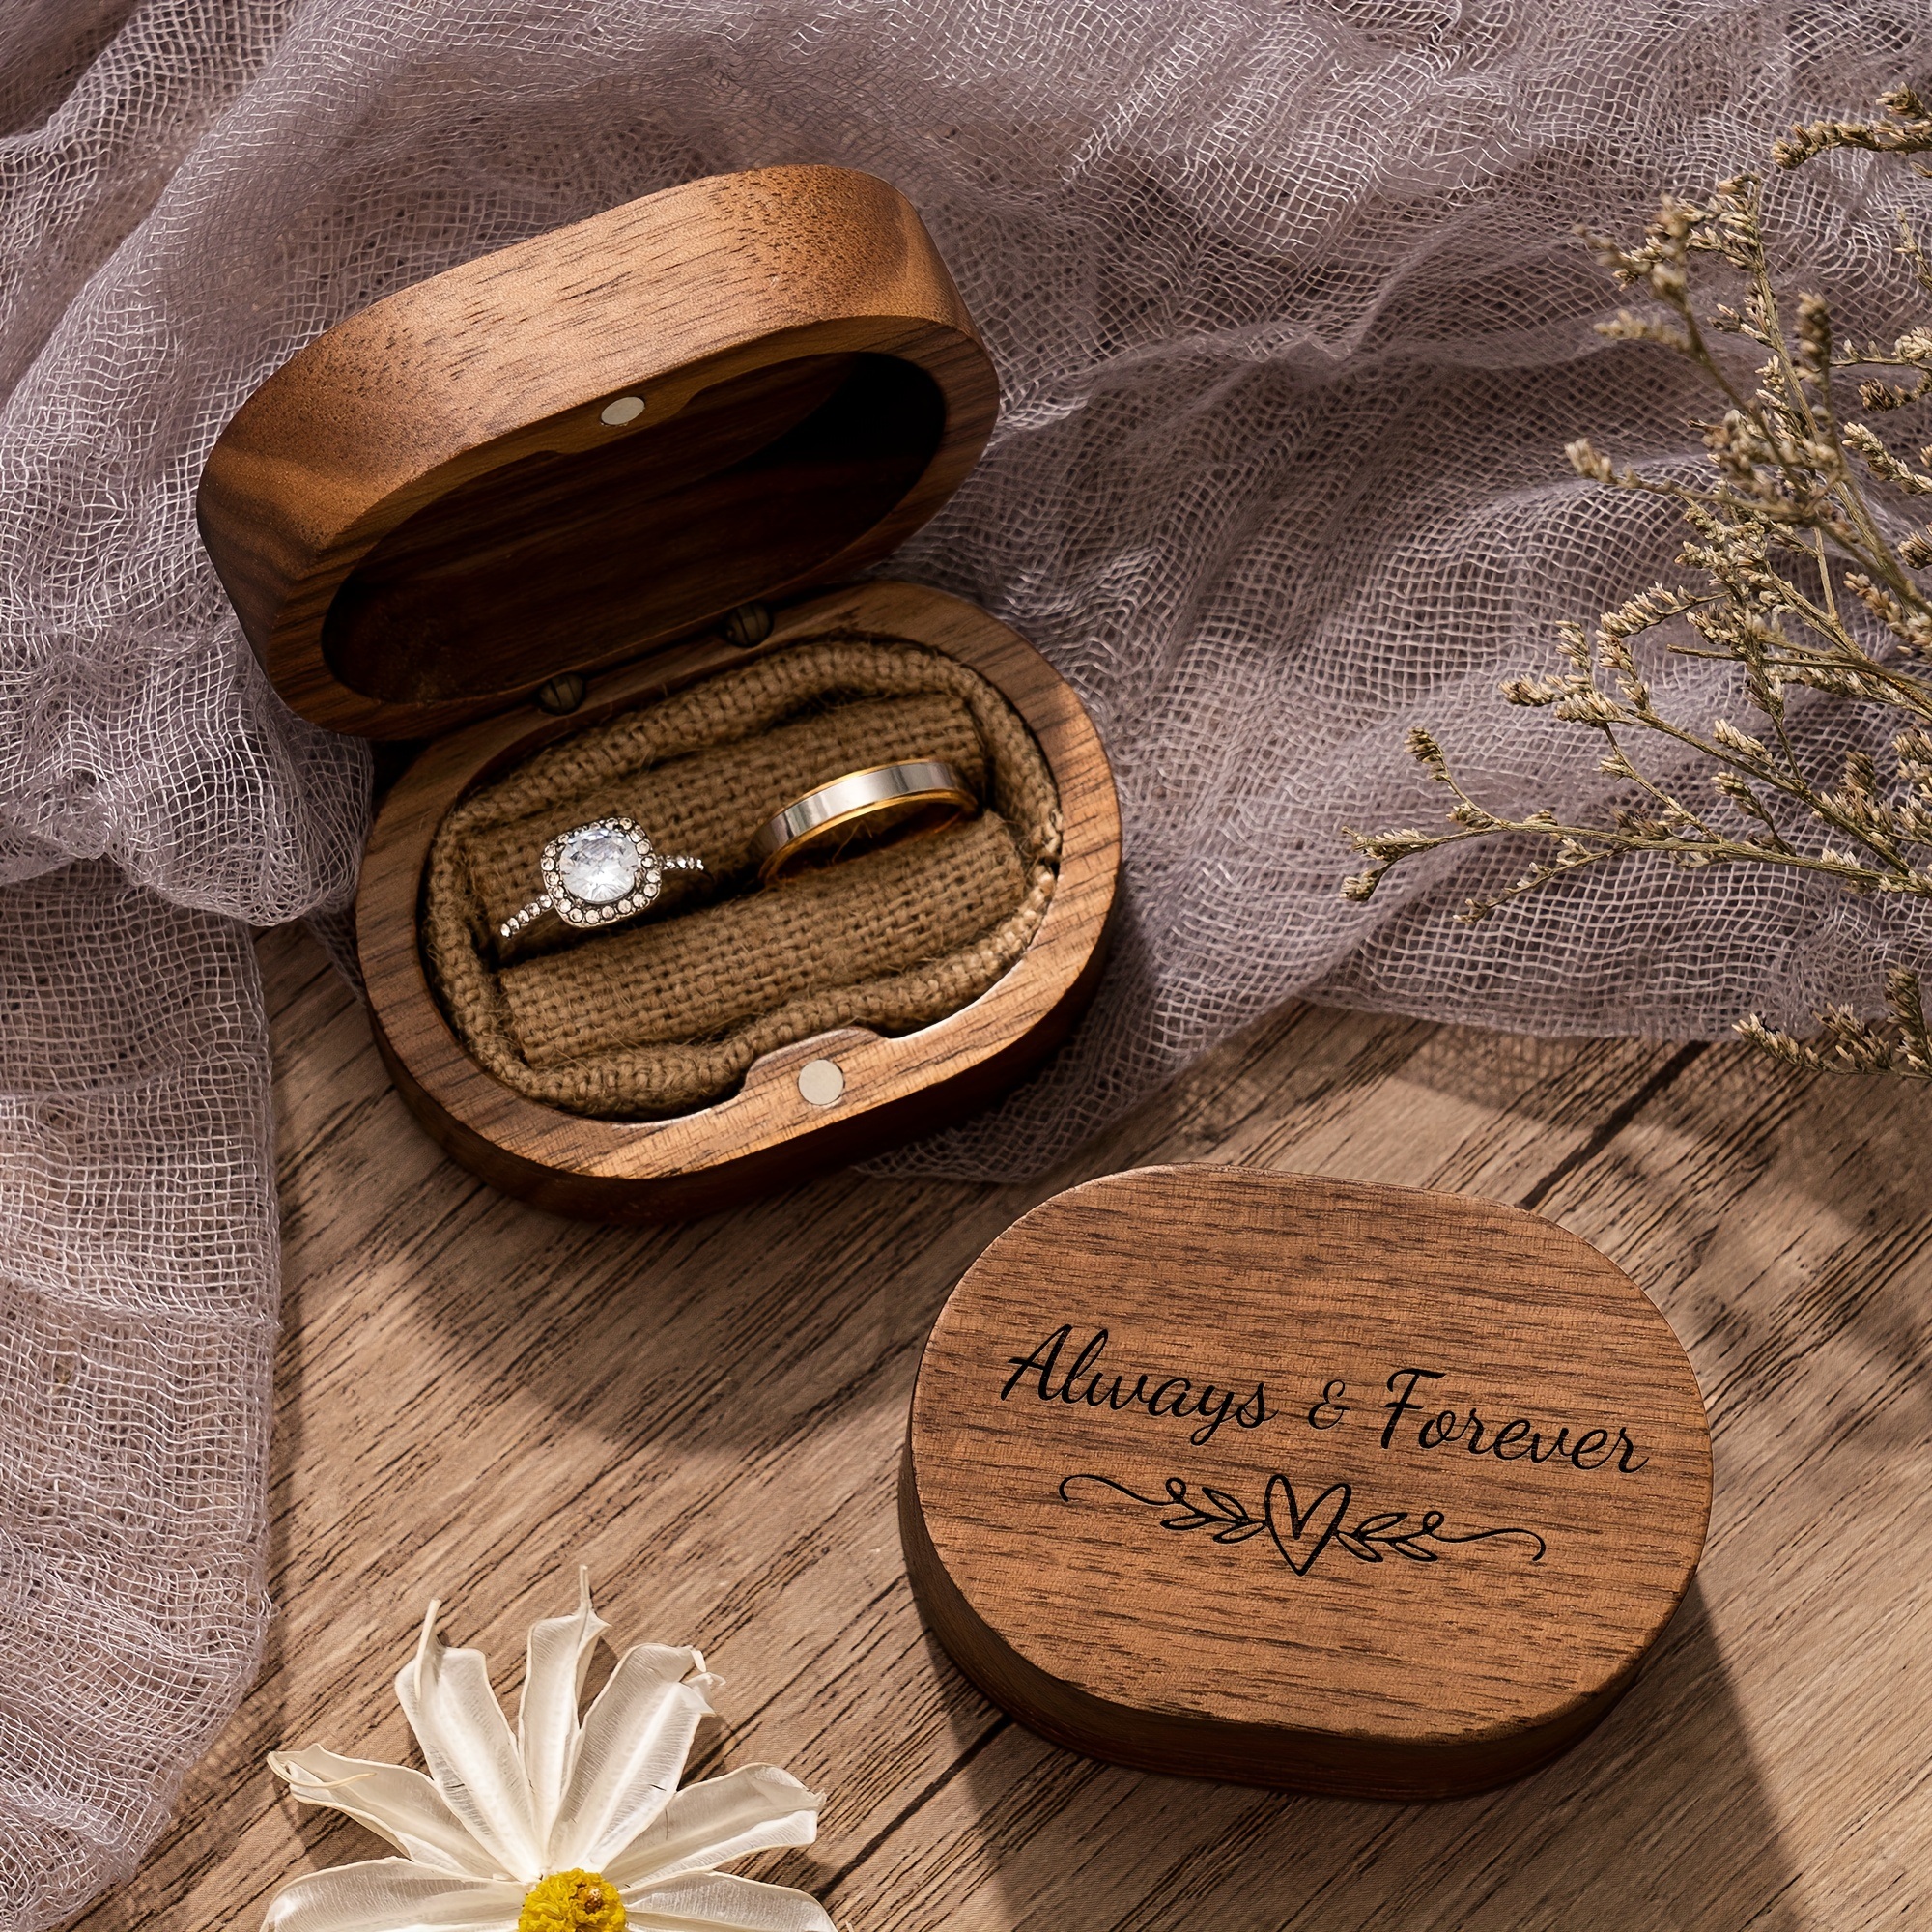 

Always And Forever Engraved Wooden Ring Box For Wedding Ceremony Engagement Proposal Ring Bearer Box, Anniversary Birthday Gift For Couples